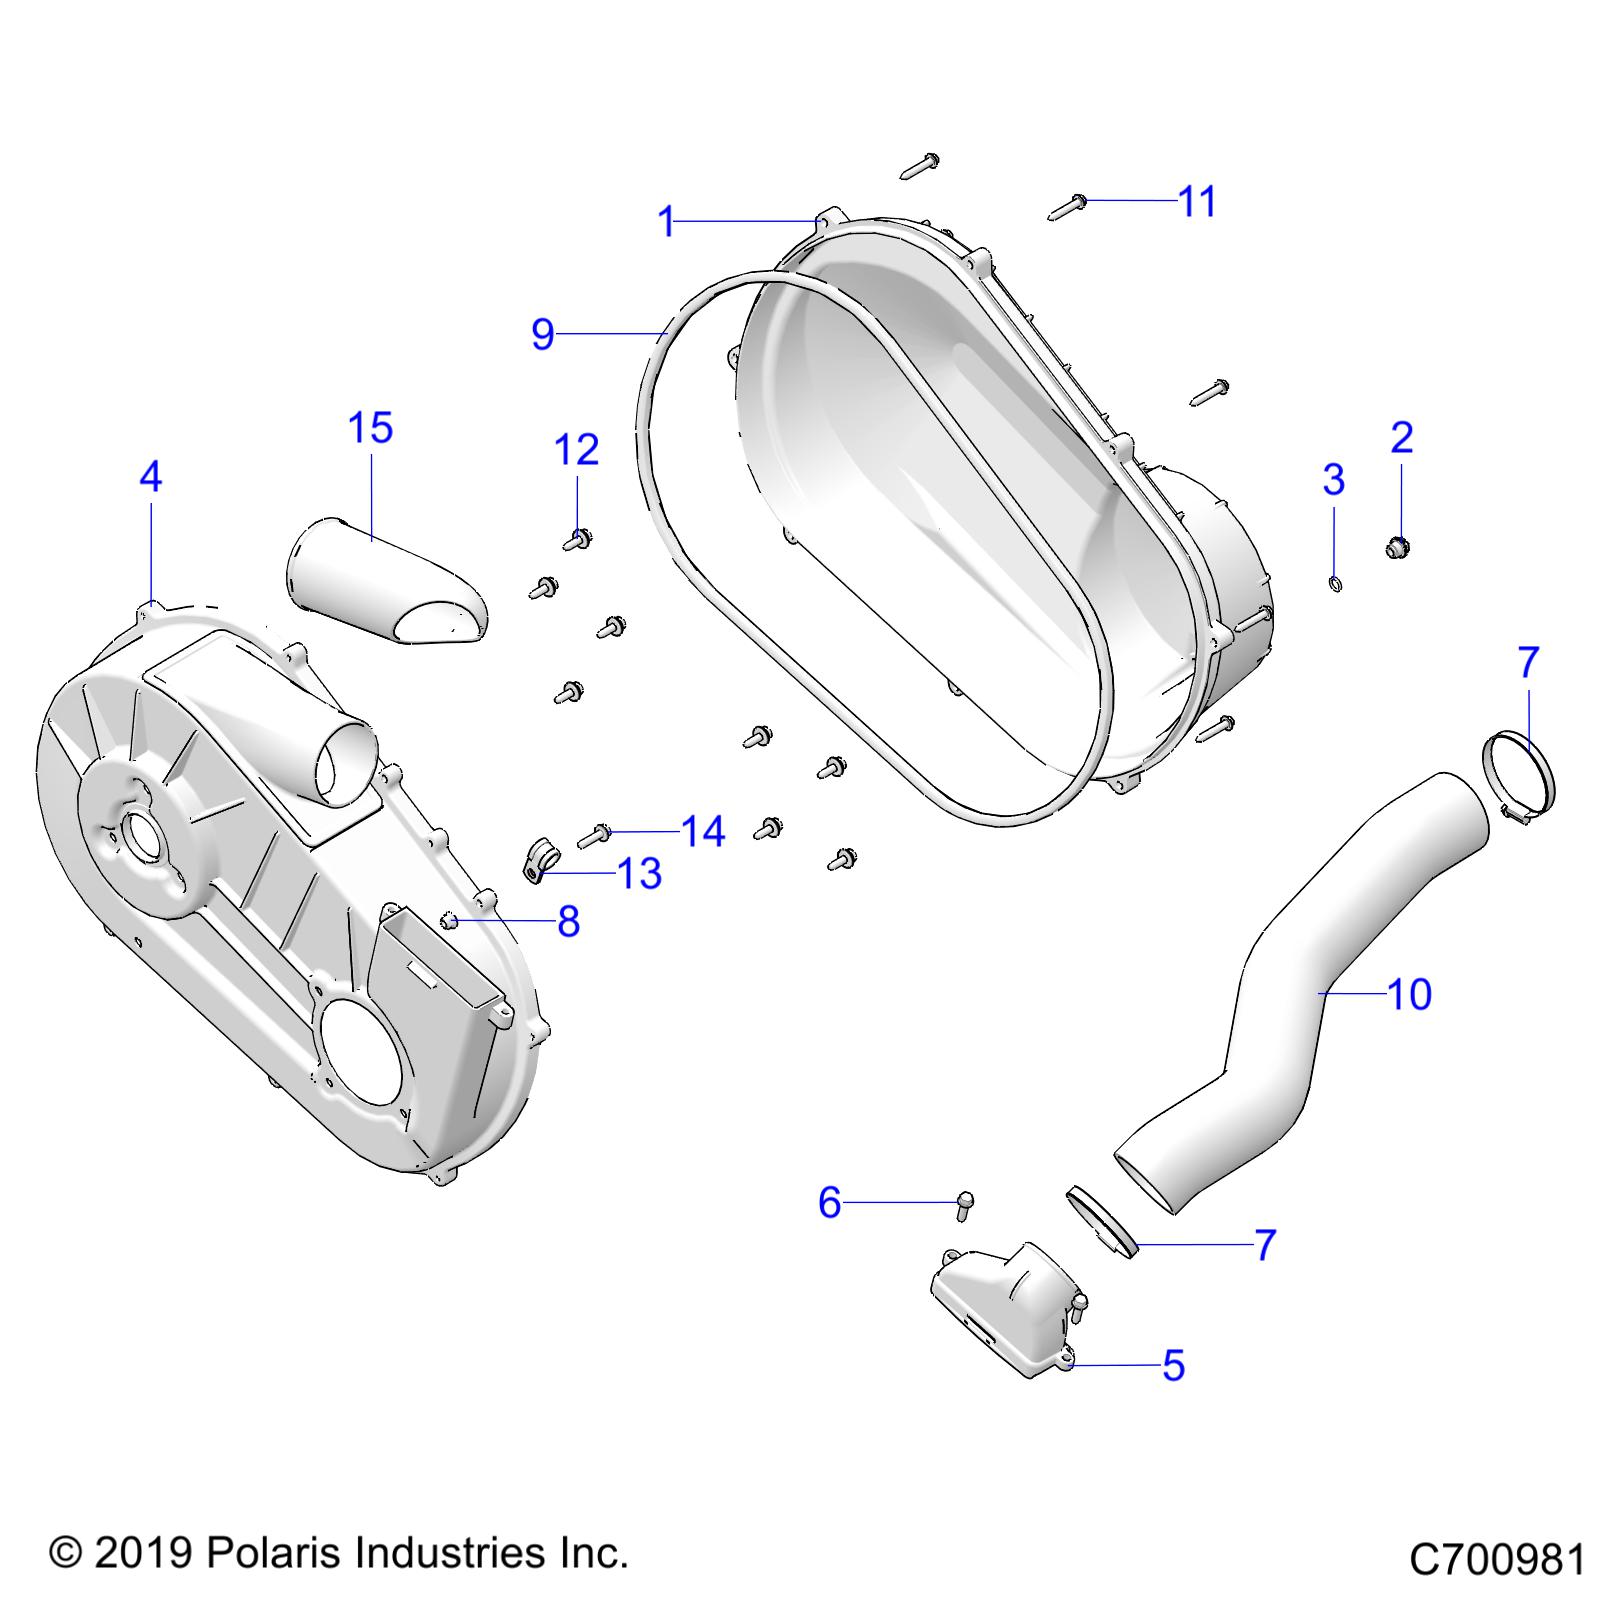 Part Number : 5450181 DUCT-OUTLET CLUTCH